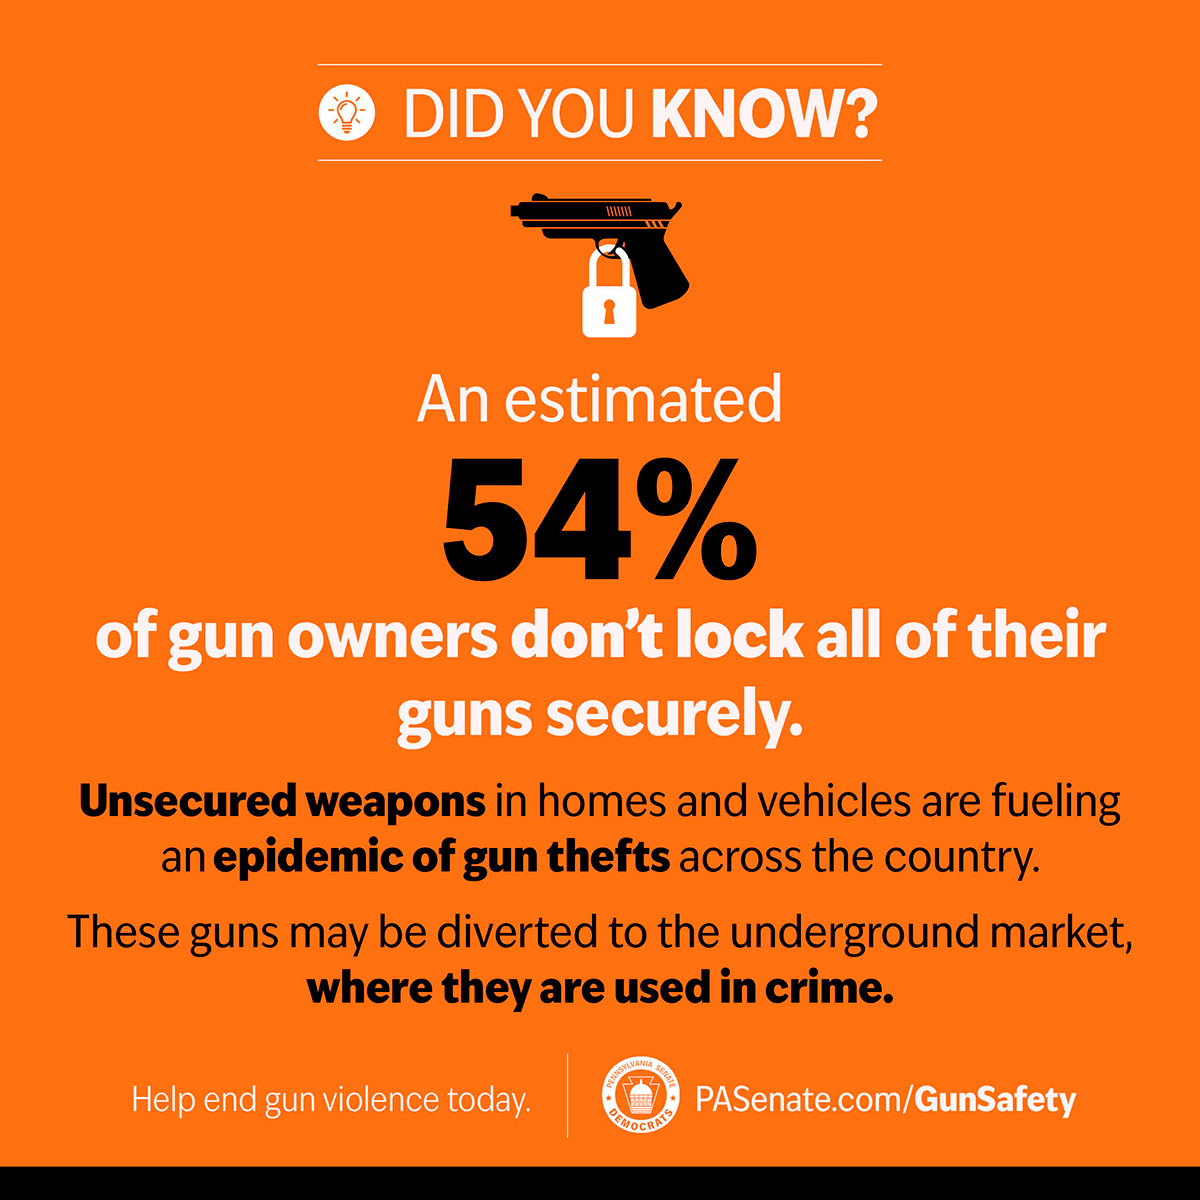 Did you know? An estimated 54% of gun owners don't lock all of their guns.